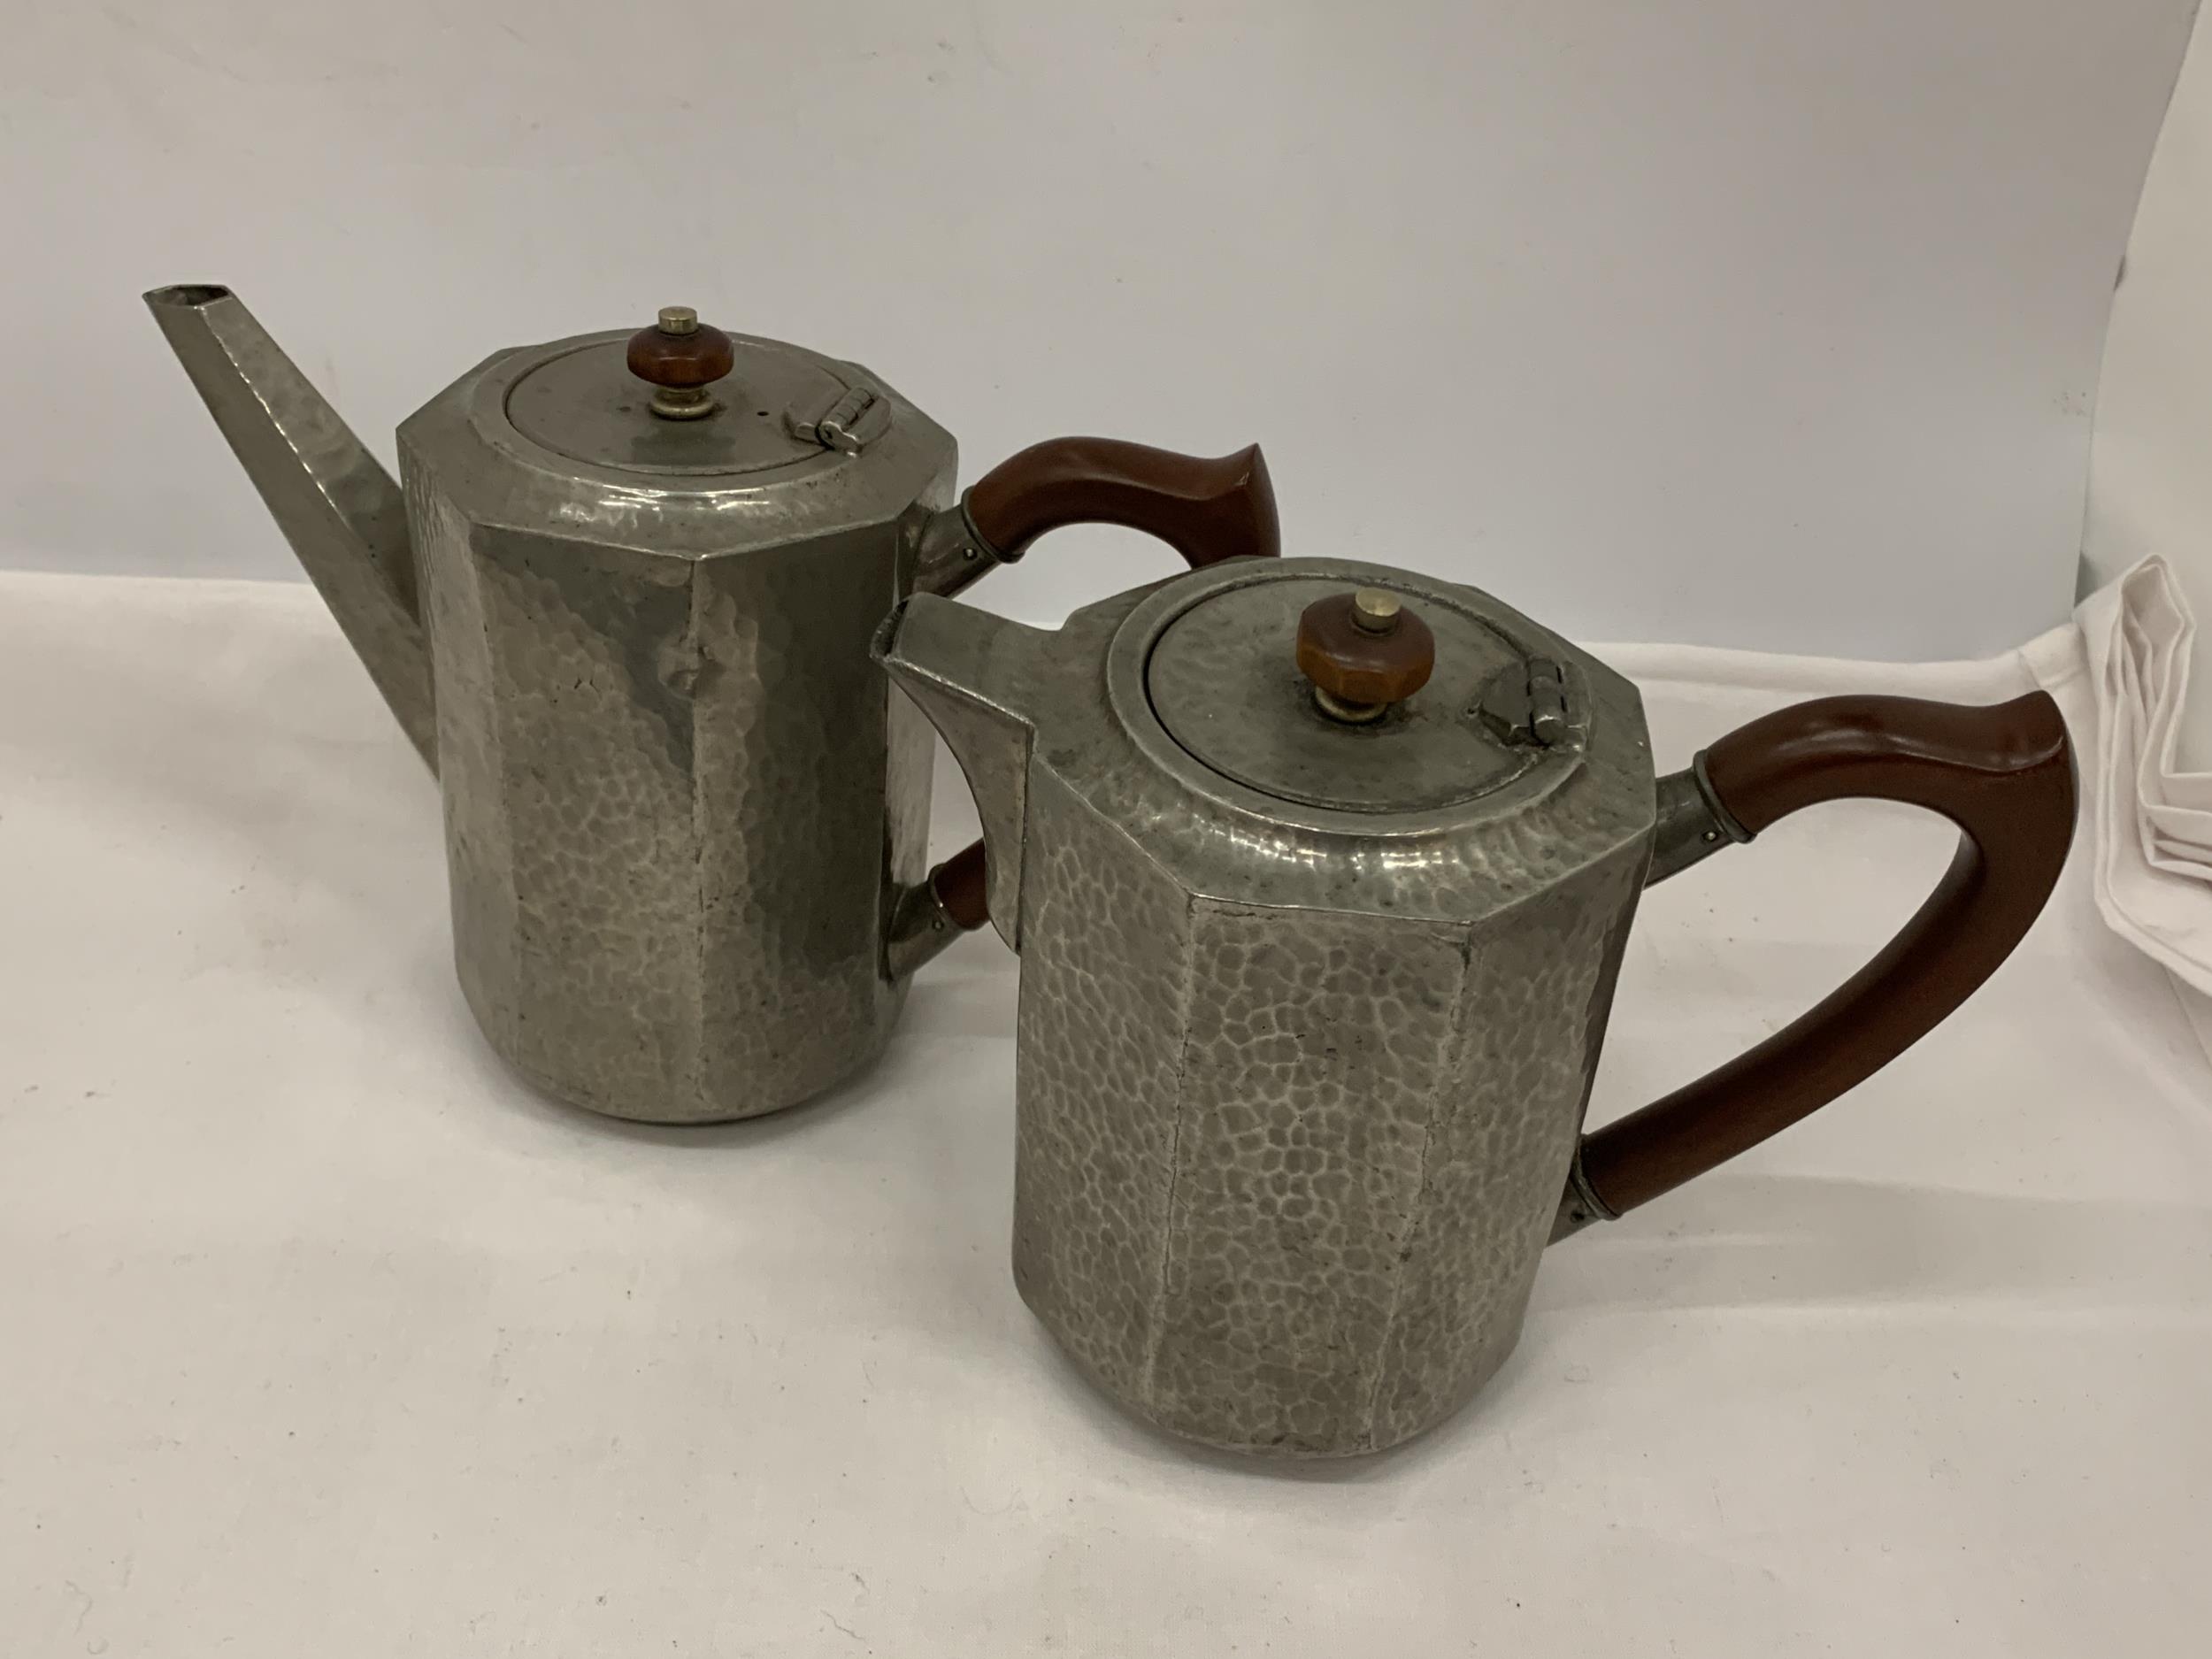 FOUR VINTAGE TUDRIC PEWTER ITEMS - TWO COFFEE POTS AND TWO SUGAR BOWLS, NO. 01650 - Image 2 of 4